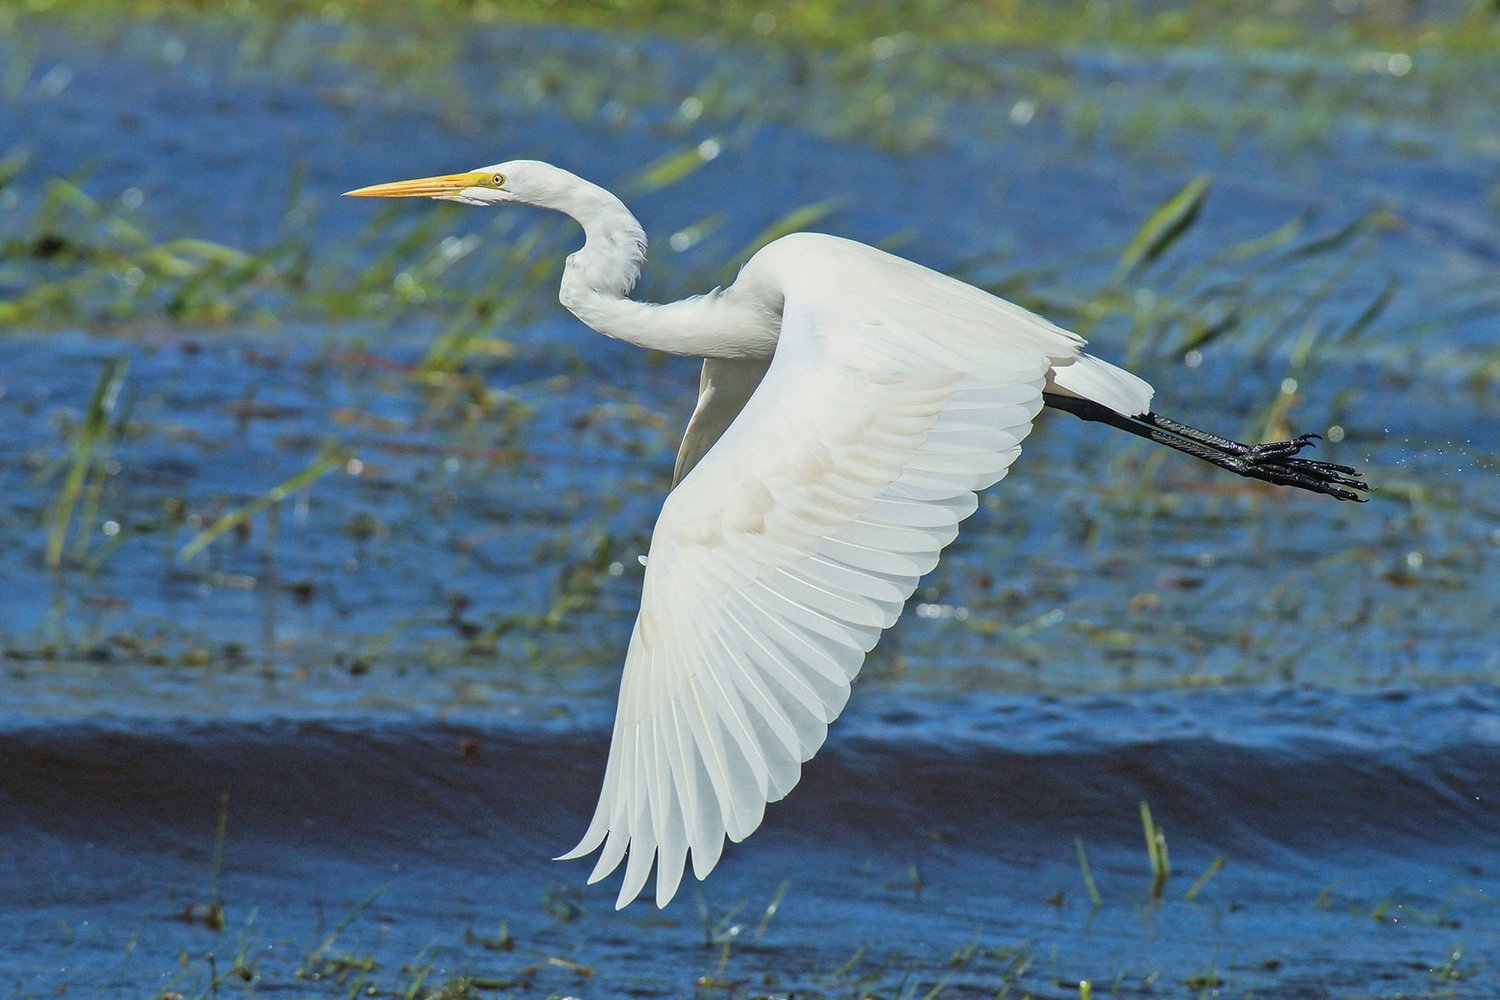 This photo is of an adult great egret.